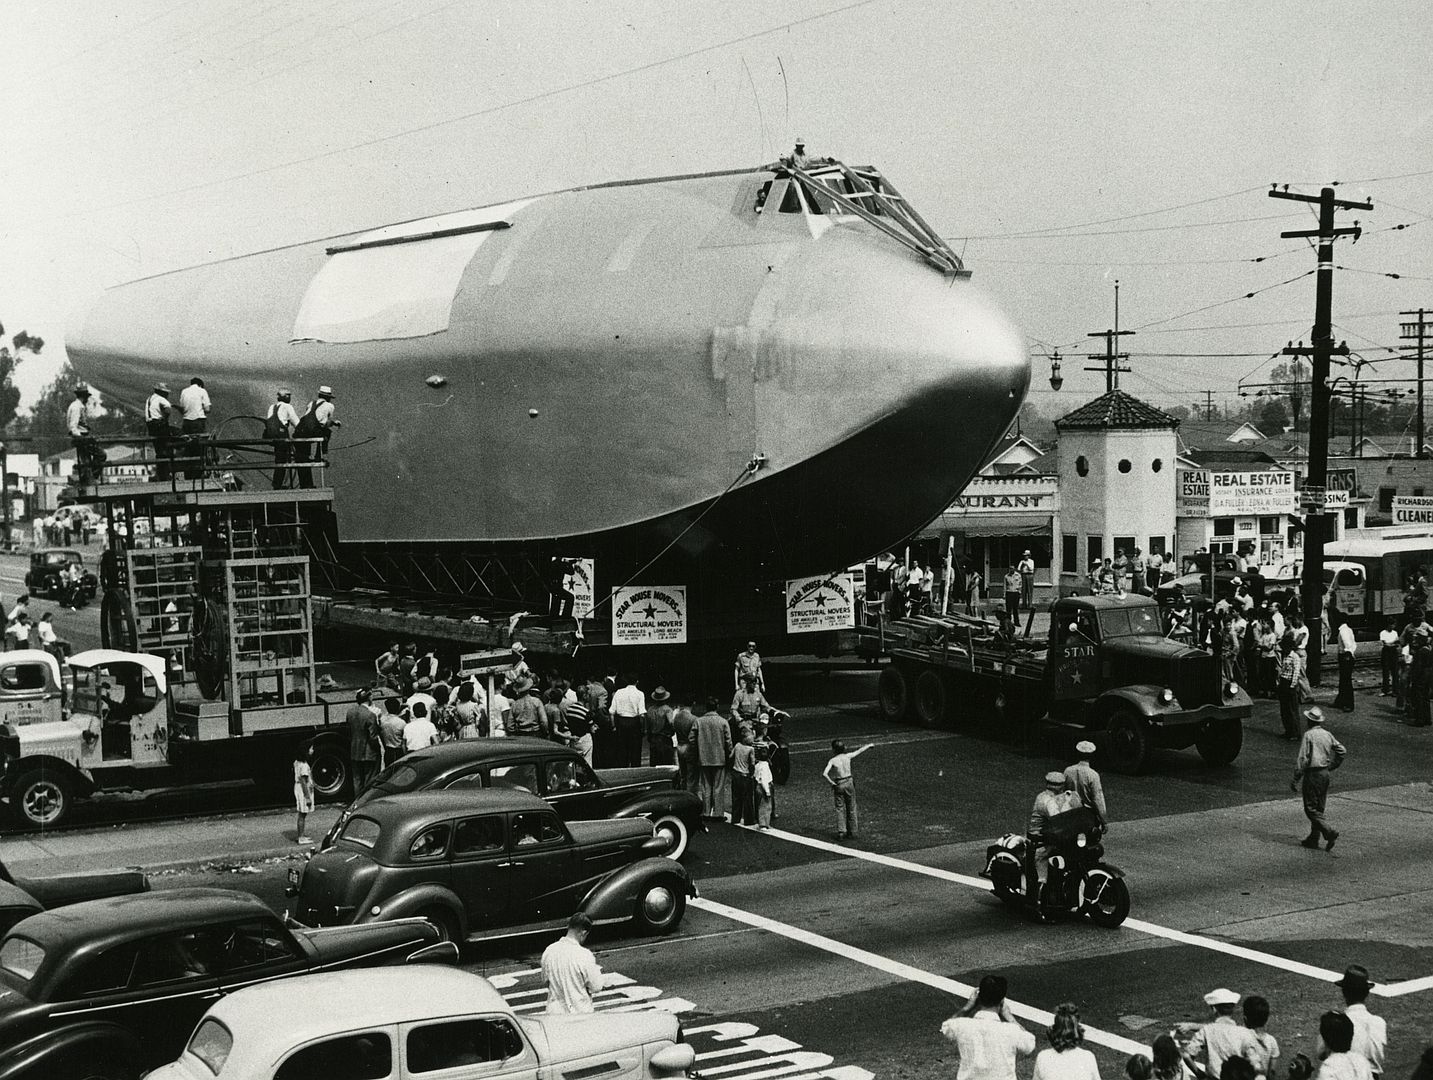 Fuselage Of The Hughes Flying Boat Being Moved To The Los Angeles Harbor 1946 3E7ShvDwvepPGihz34viT9